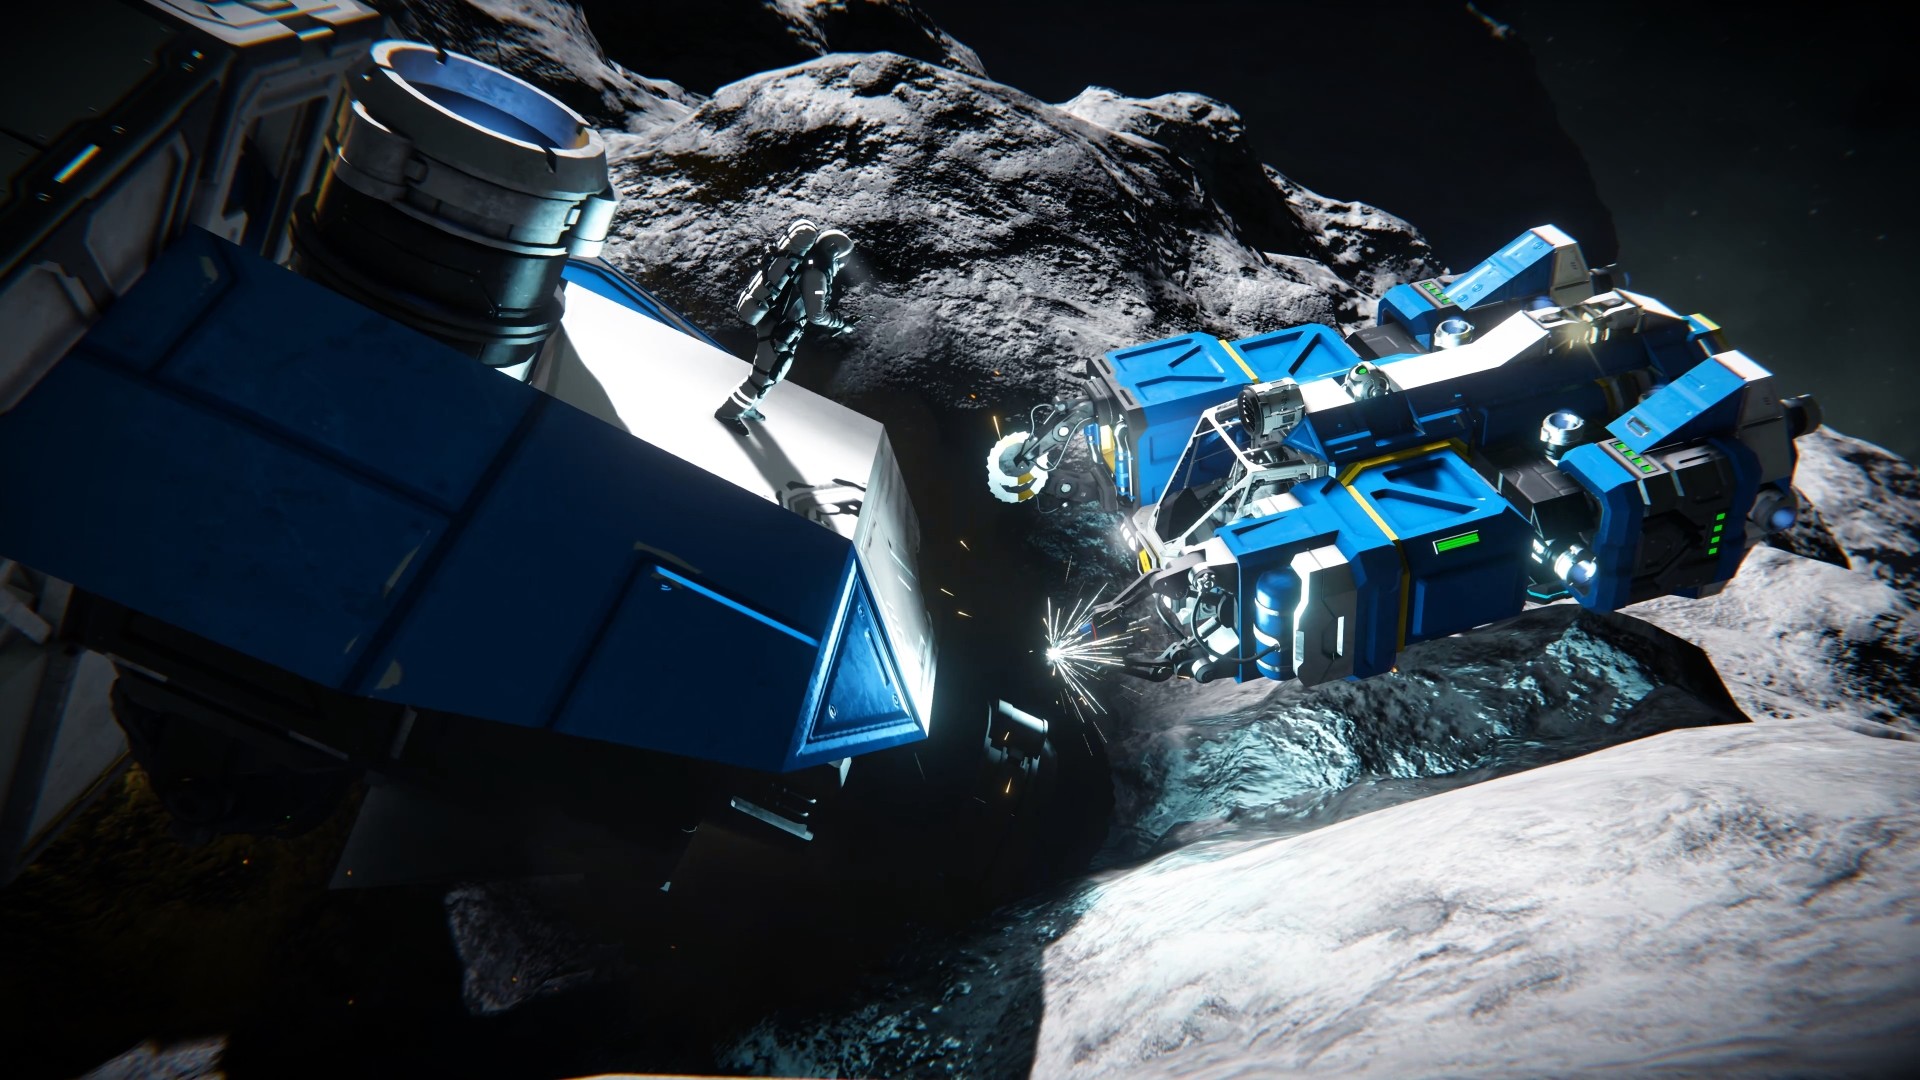 download space engineers steam for free